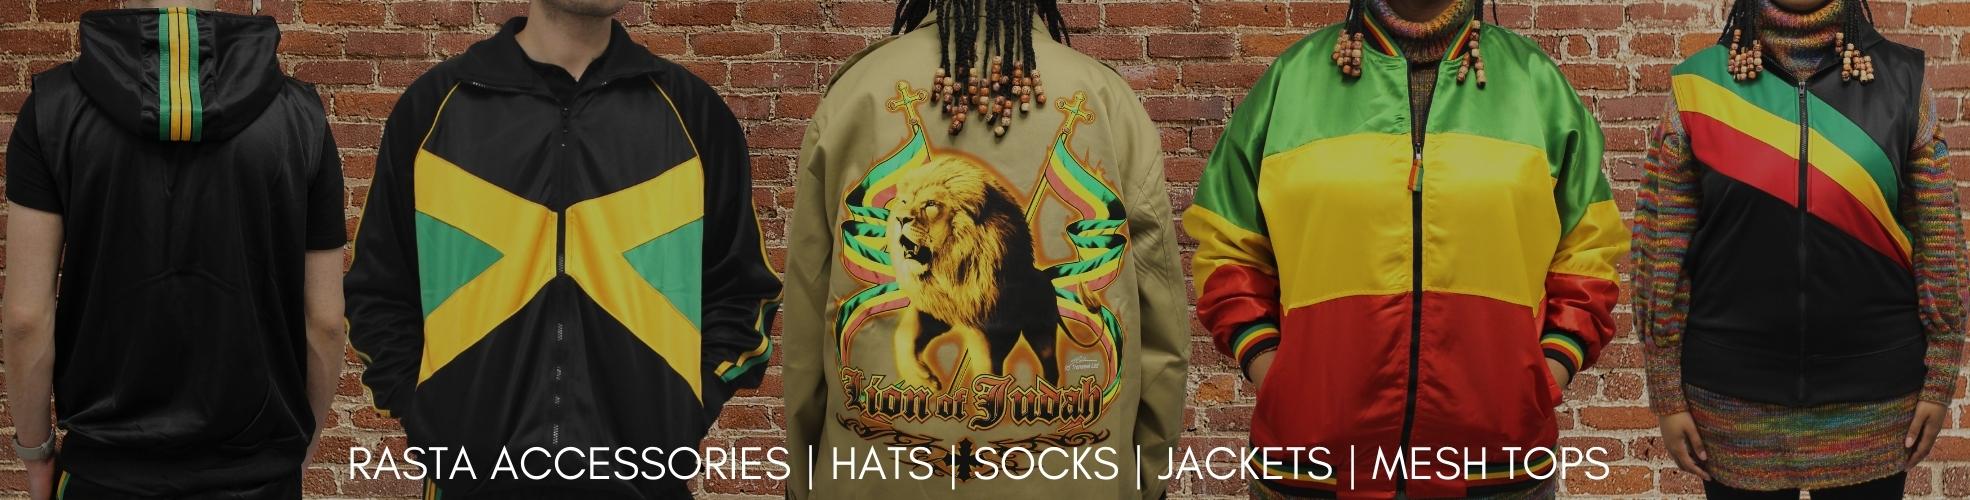 Rasta Accessories | Hats | Socks | Jackets | Mesh Tops and many more products. 